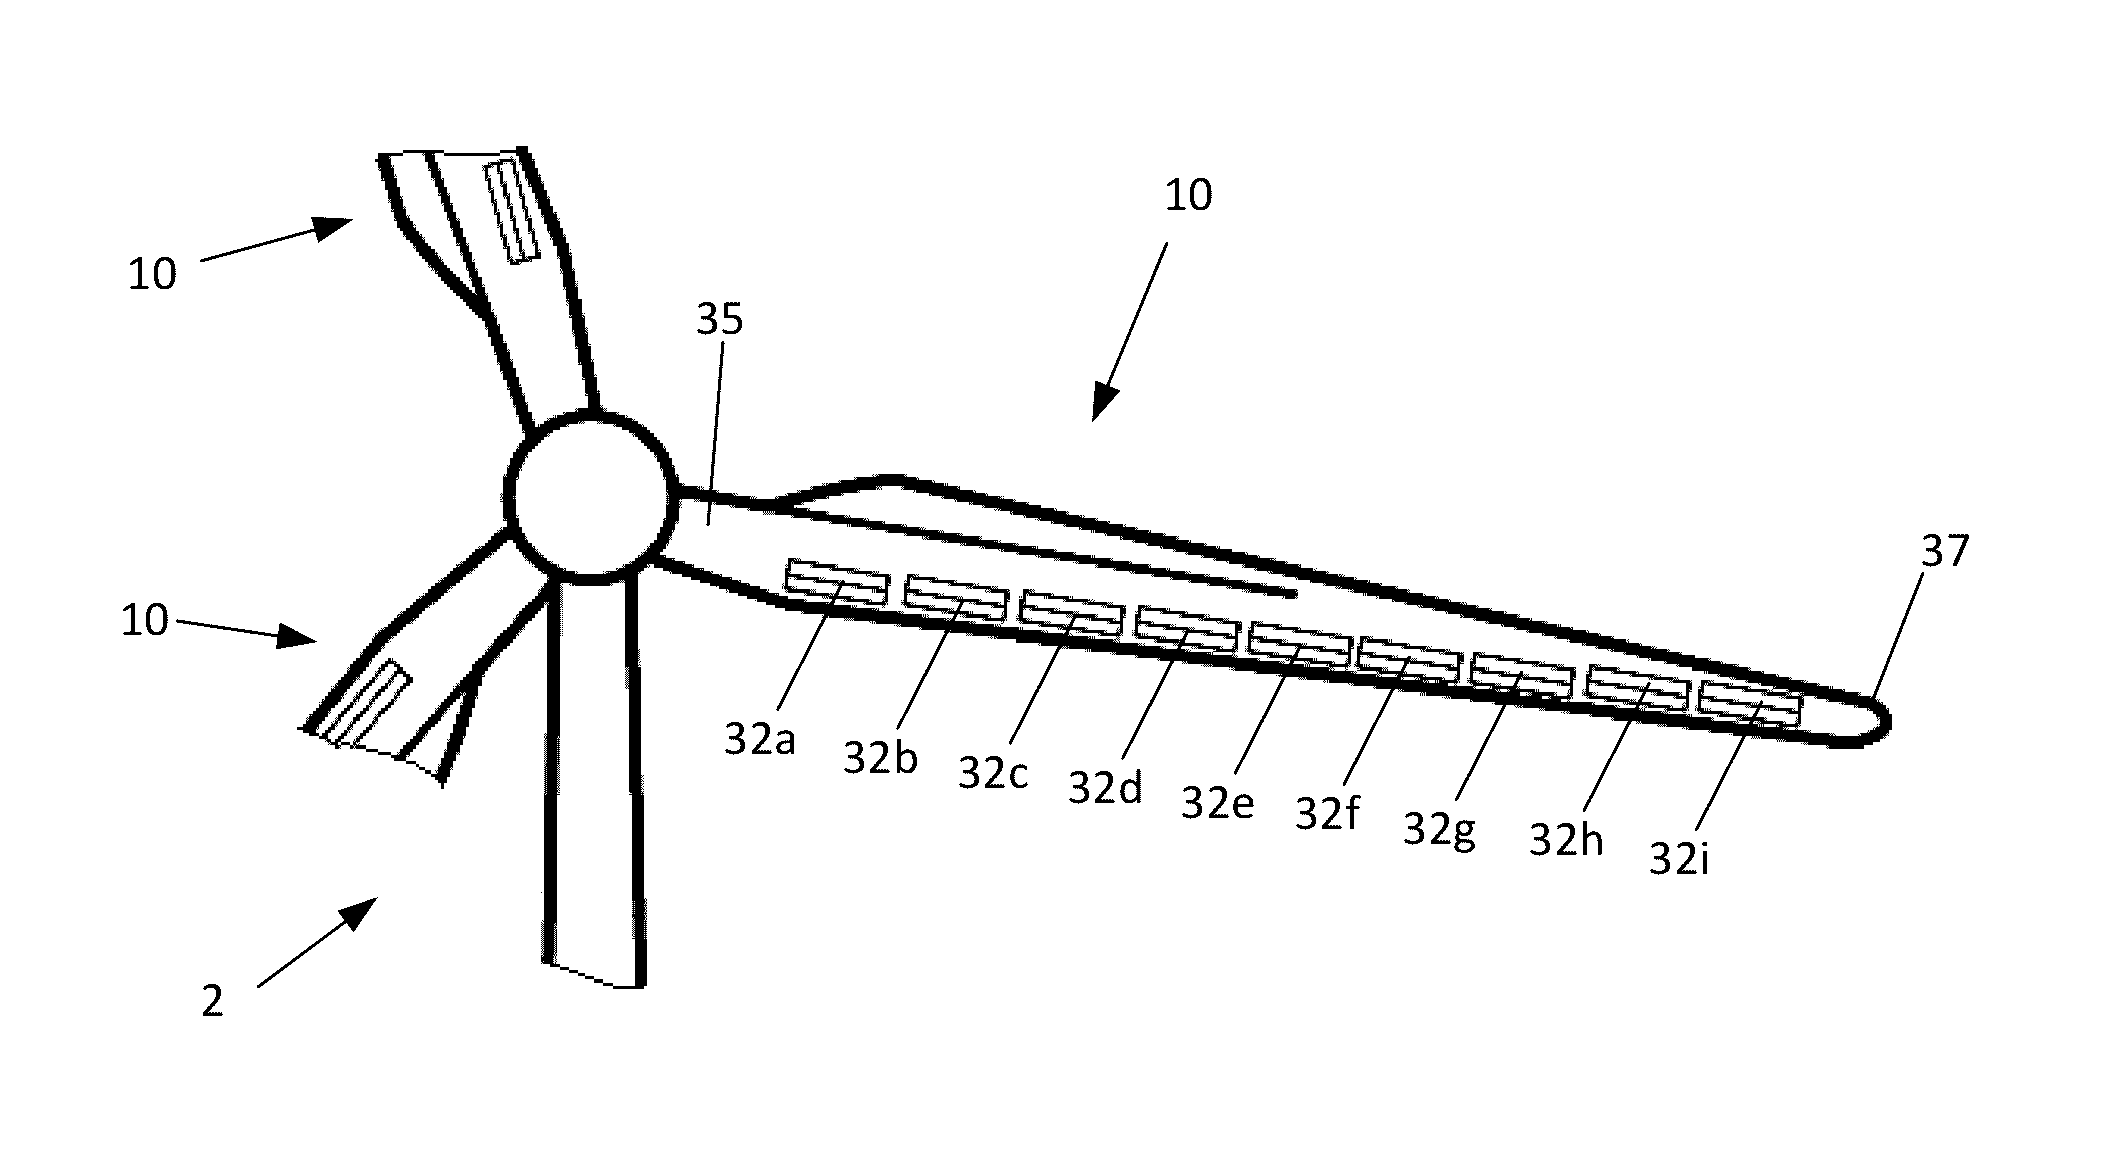 Actuation of distributed load management devices on aerodynamic blades